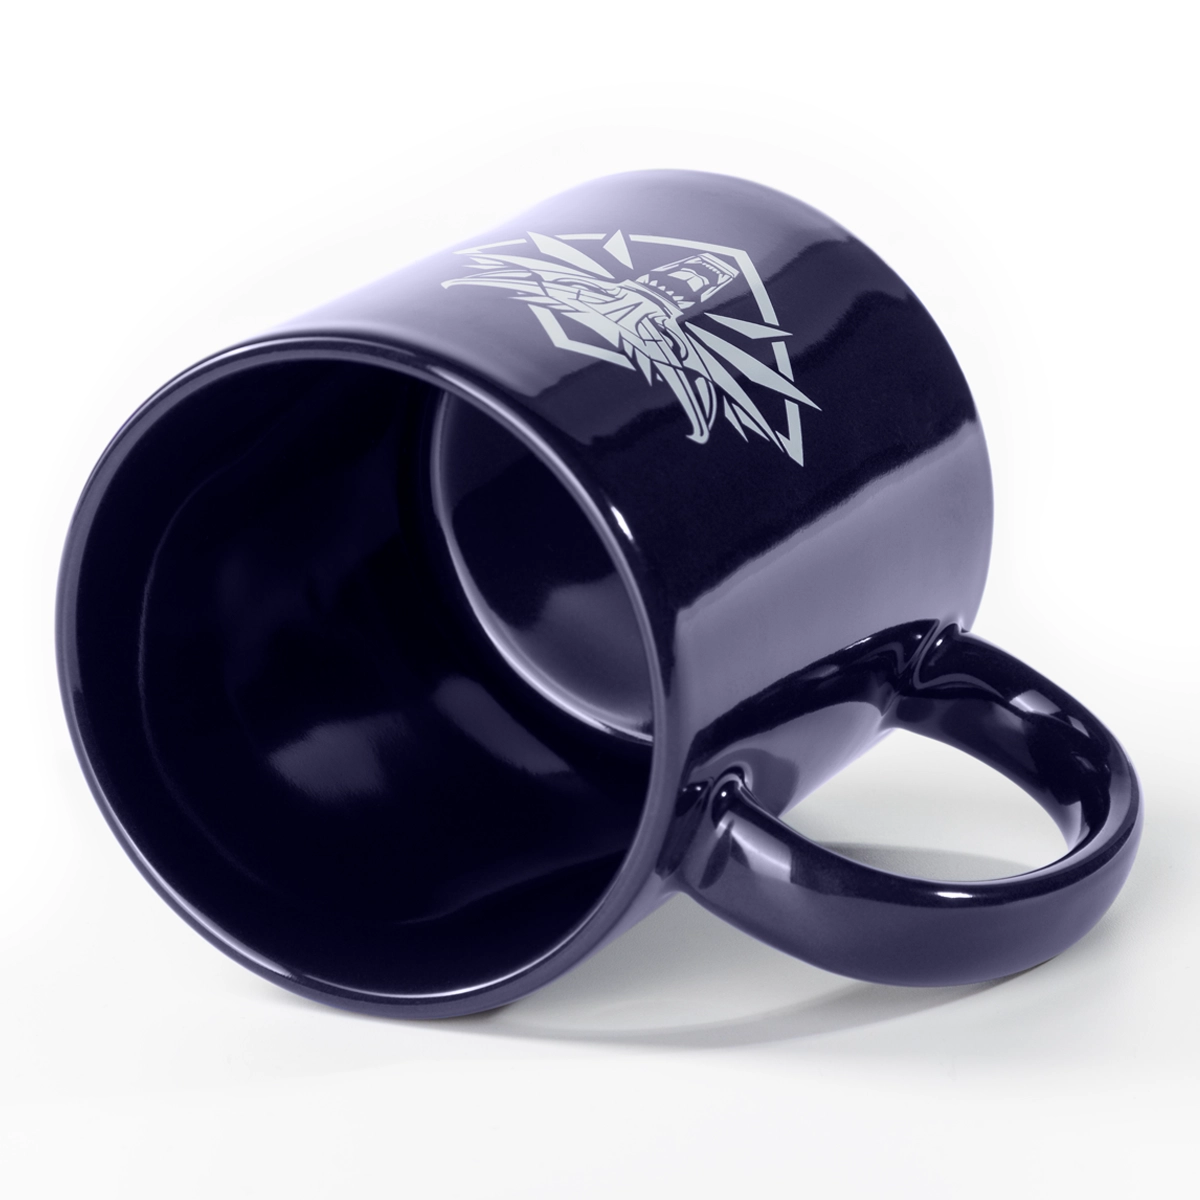 The Witcher Mug "School Of The Wolf" Image 5